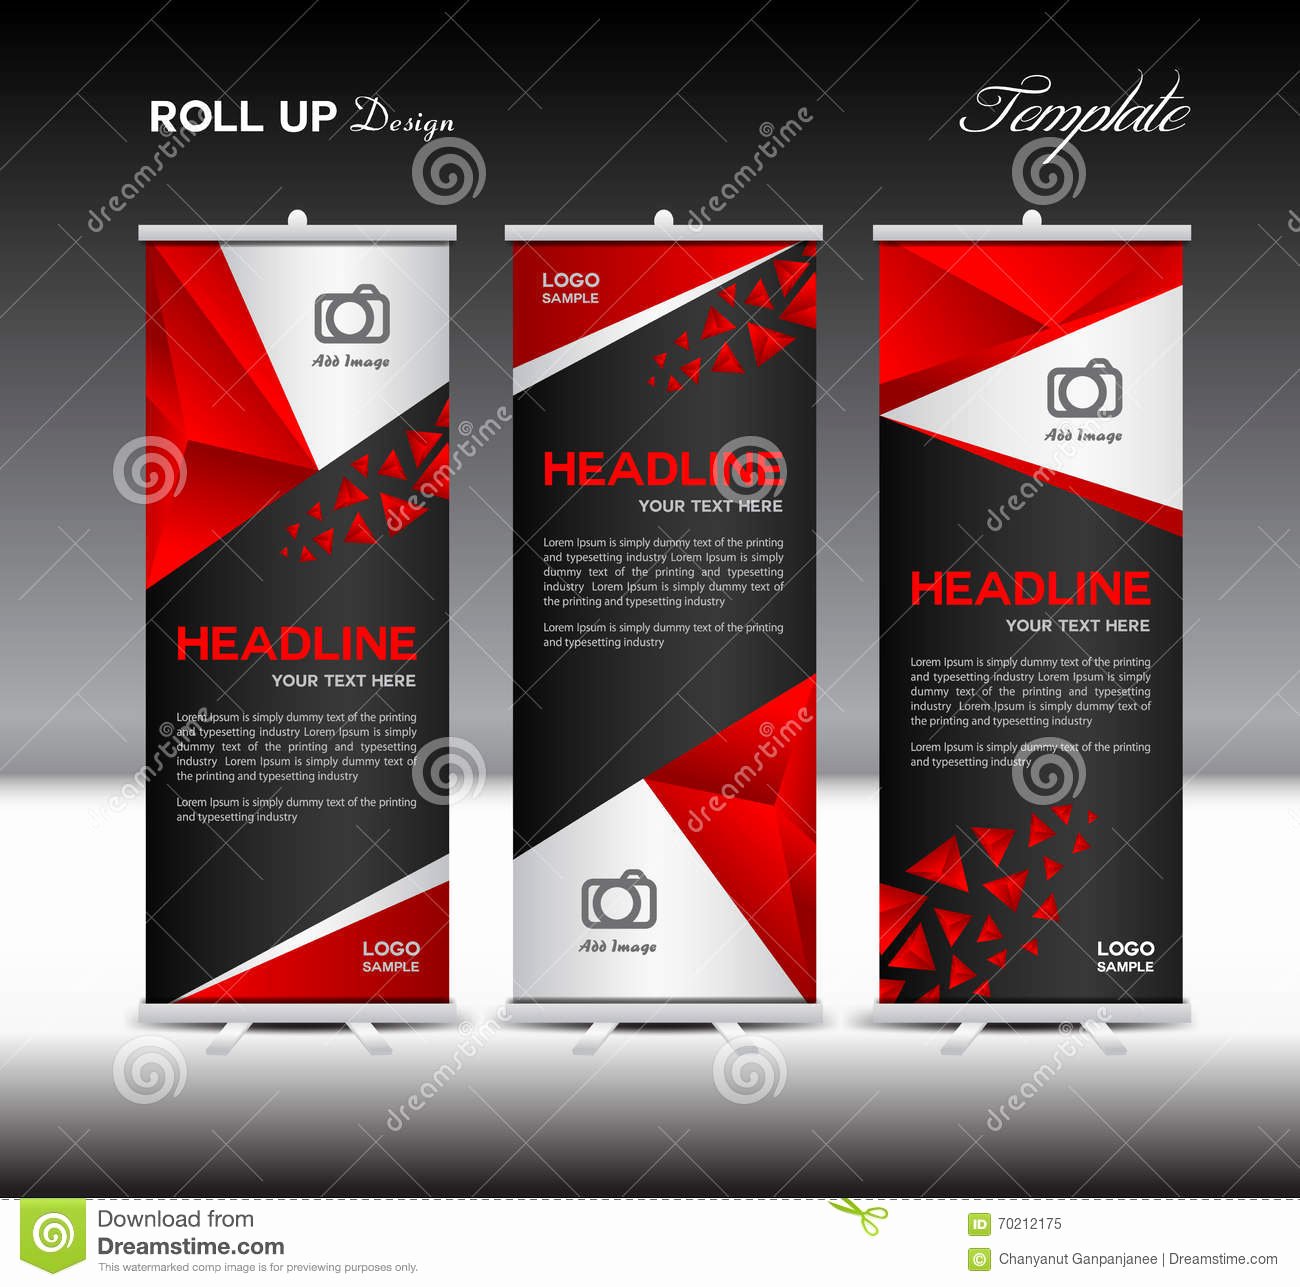 Roll Up Banners Template Luxury Red Roll Up Banner Template Vector Illustration Banner